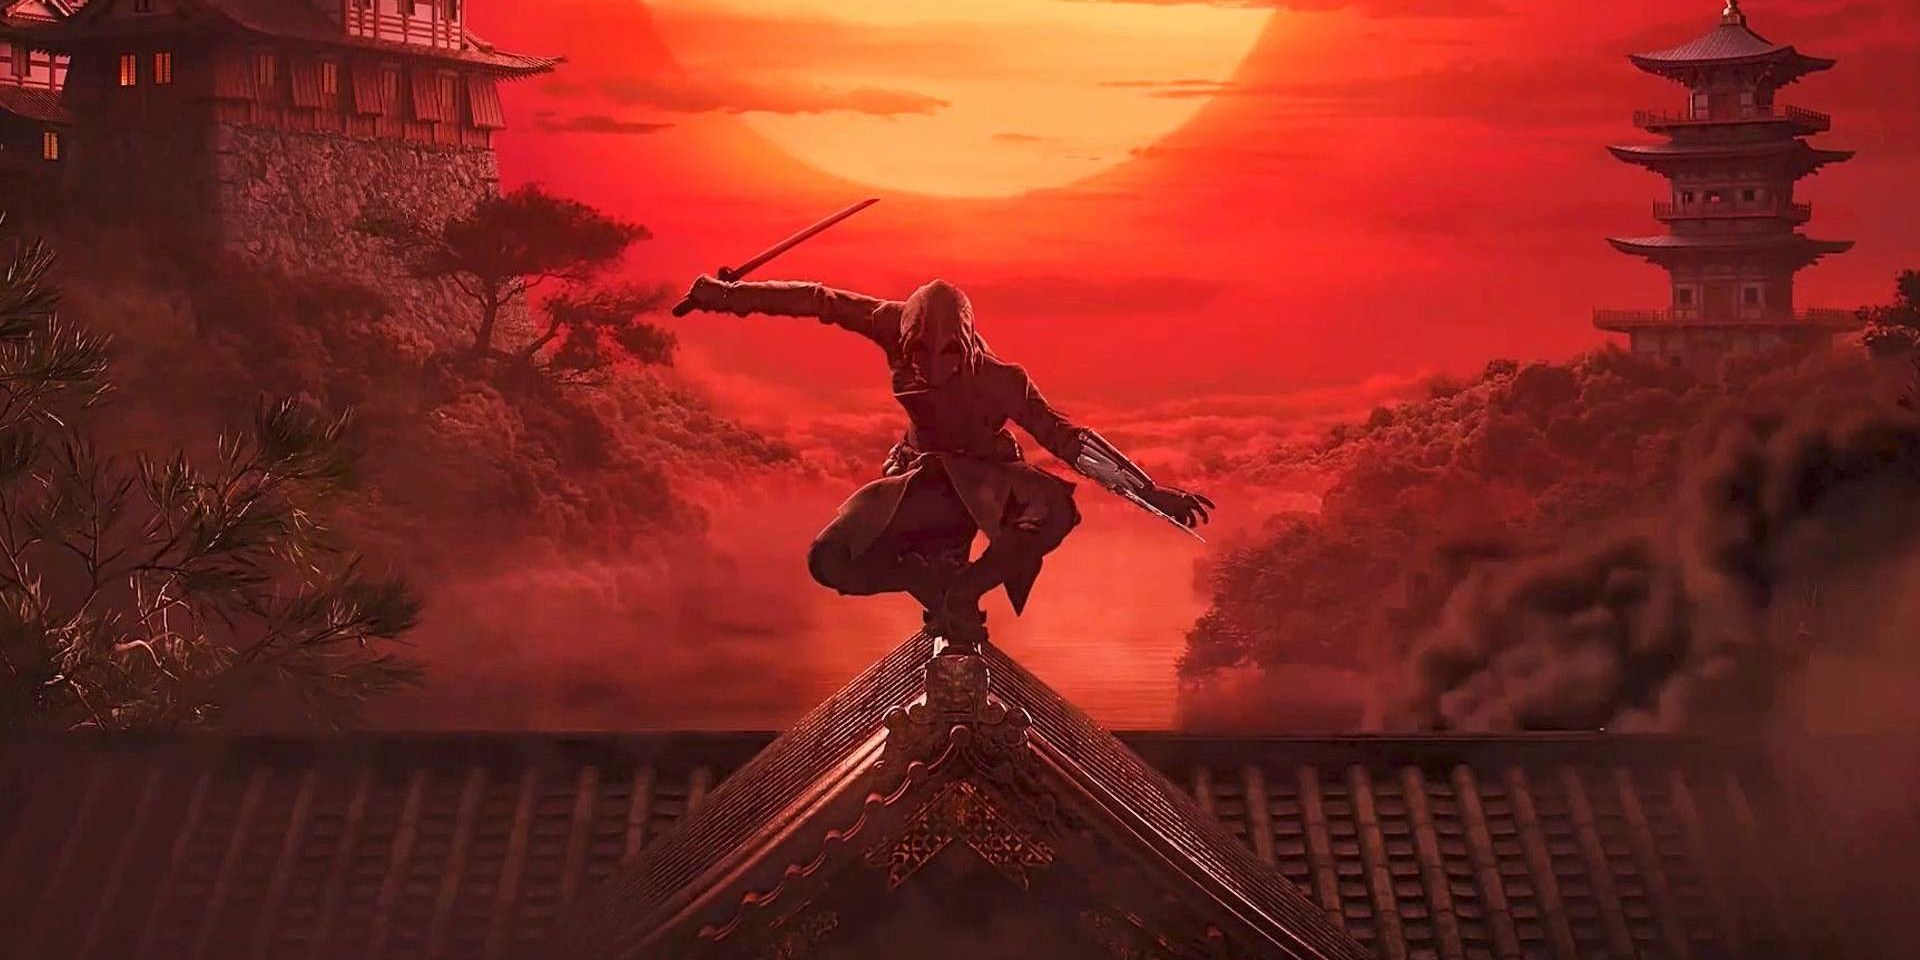 One of the protagonists of Assassin's Creed Red poised atop a building with katana in hand. A red sun rises in the background.